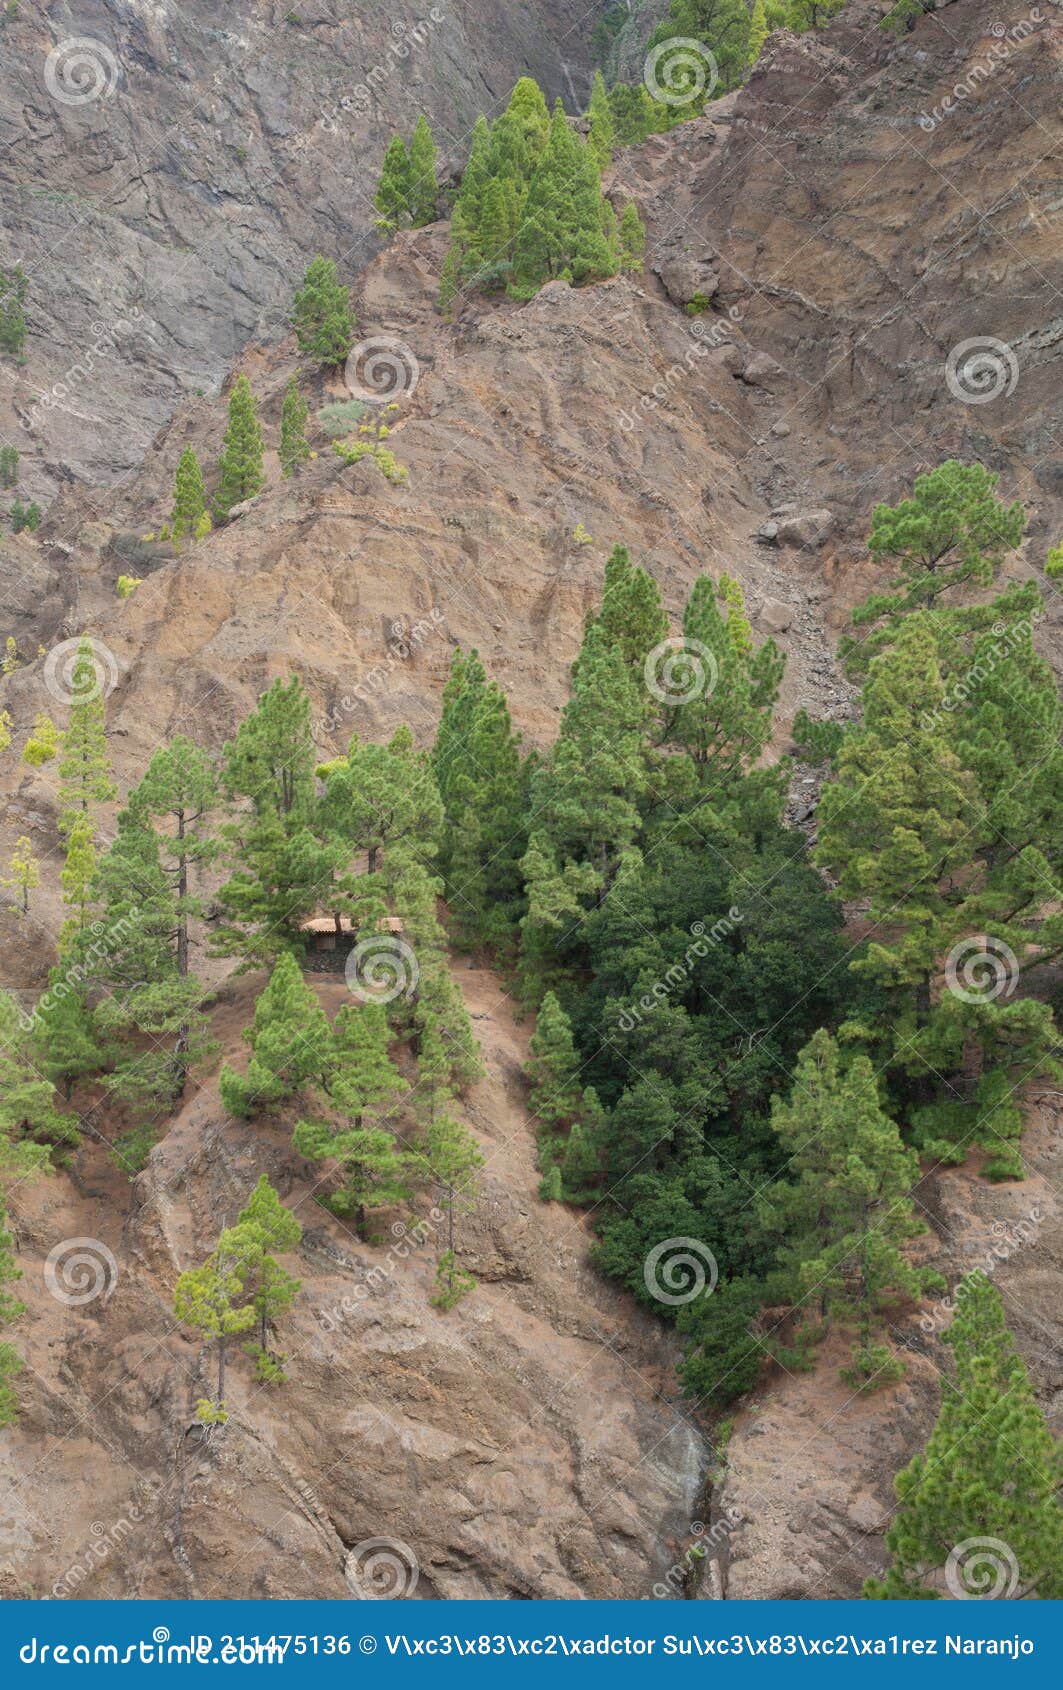 slope with canary island pines and firetree.